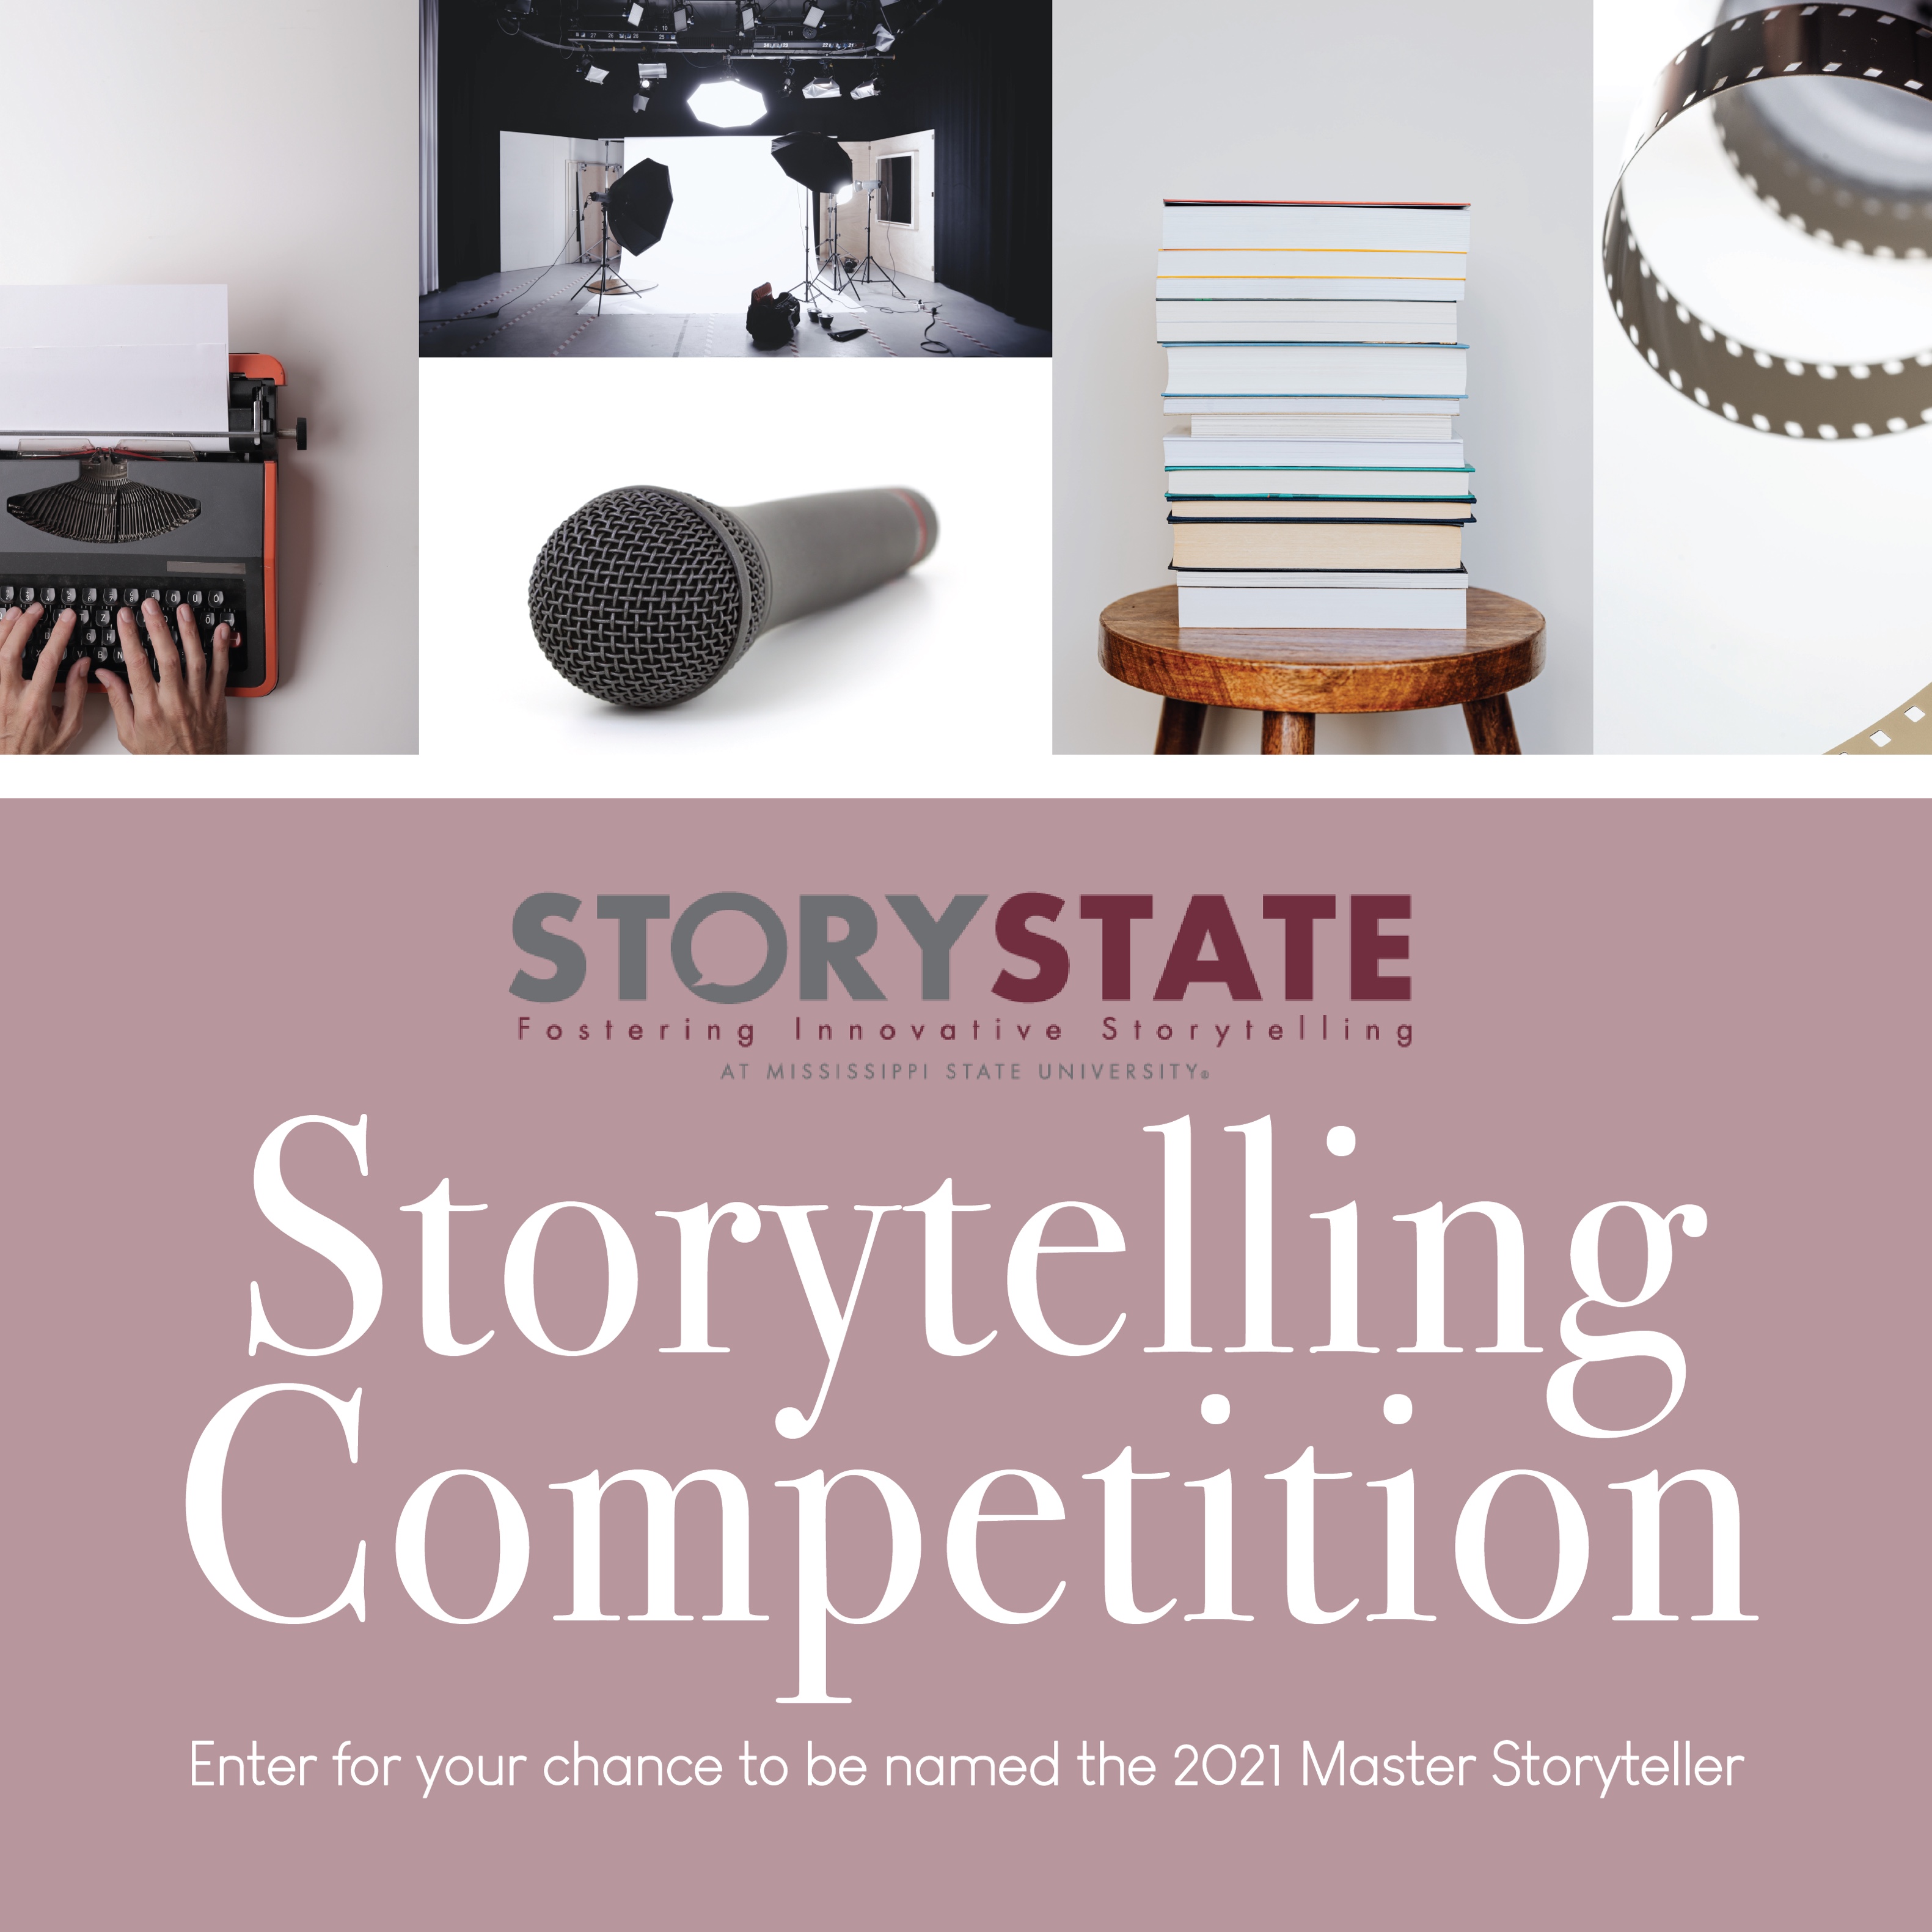 MSU Story State Storytelling Competition graphic with images of a typewriter, film set, microphone, stack of books on a wooden stool, and camera film